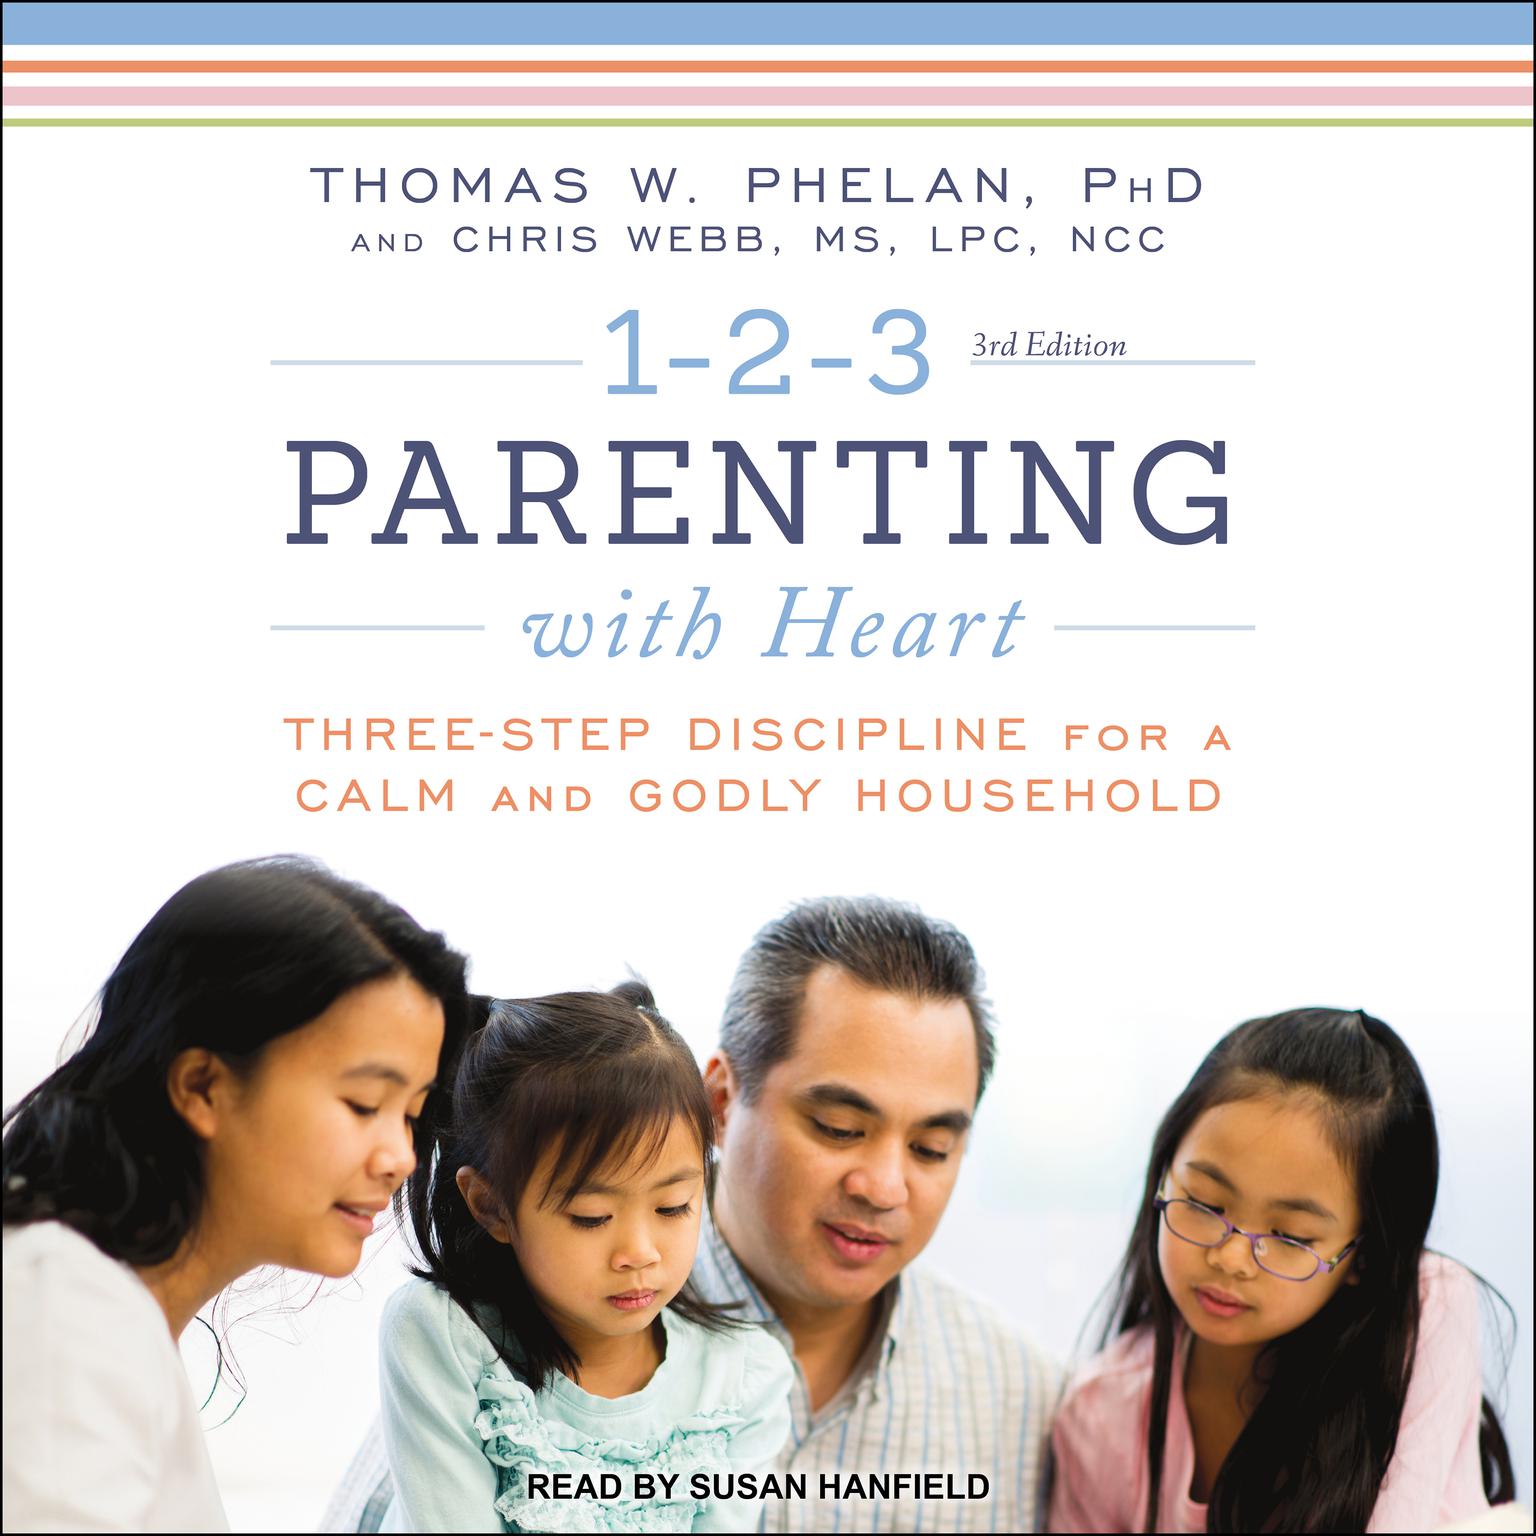 1-2-3 Parenting with Heart: Three-Step Discipline for a Calm and Godly Household Audiobook, by Thomas W. Phelan